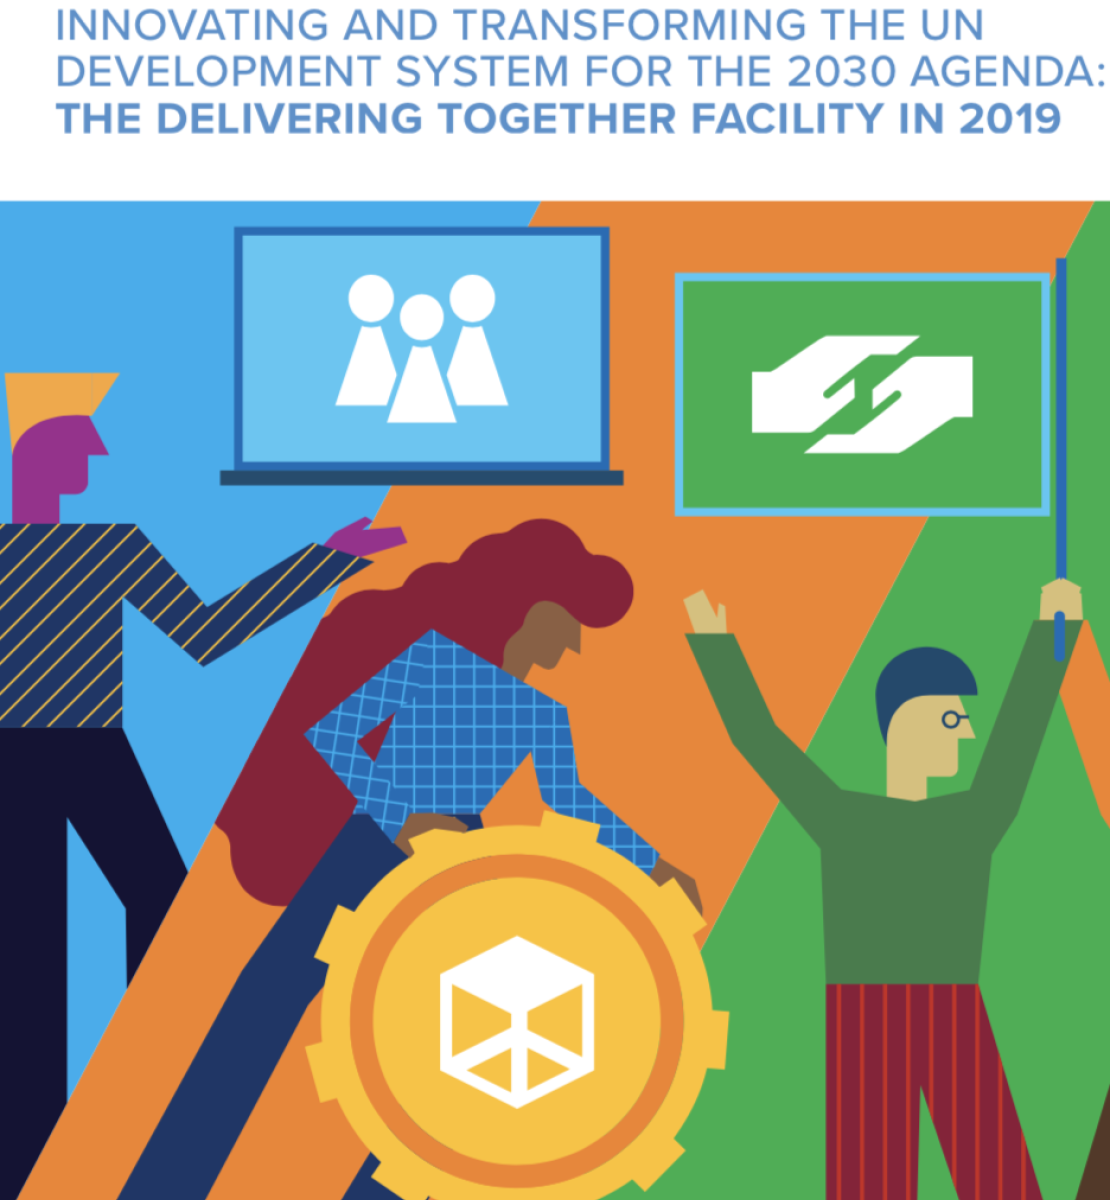 Cover shows colouful animated people holding symbols of working together with the title, "Innovating and Transforming the UN Development System for the 2030 Agenda: The Delivering Together Facility in 2019" just above.